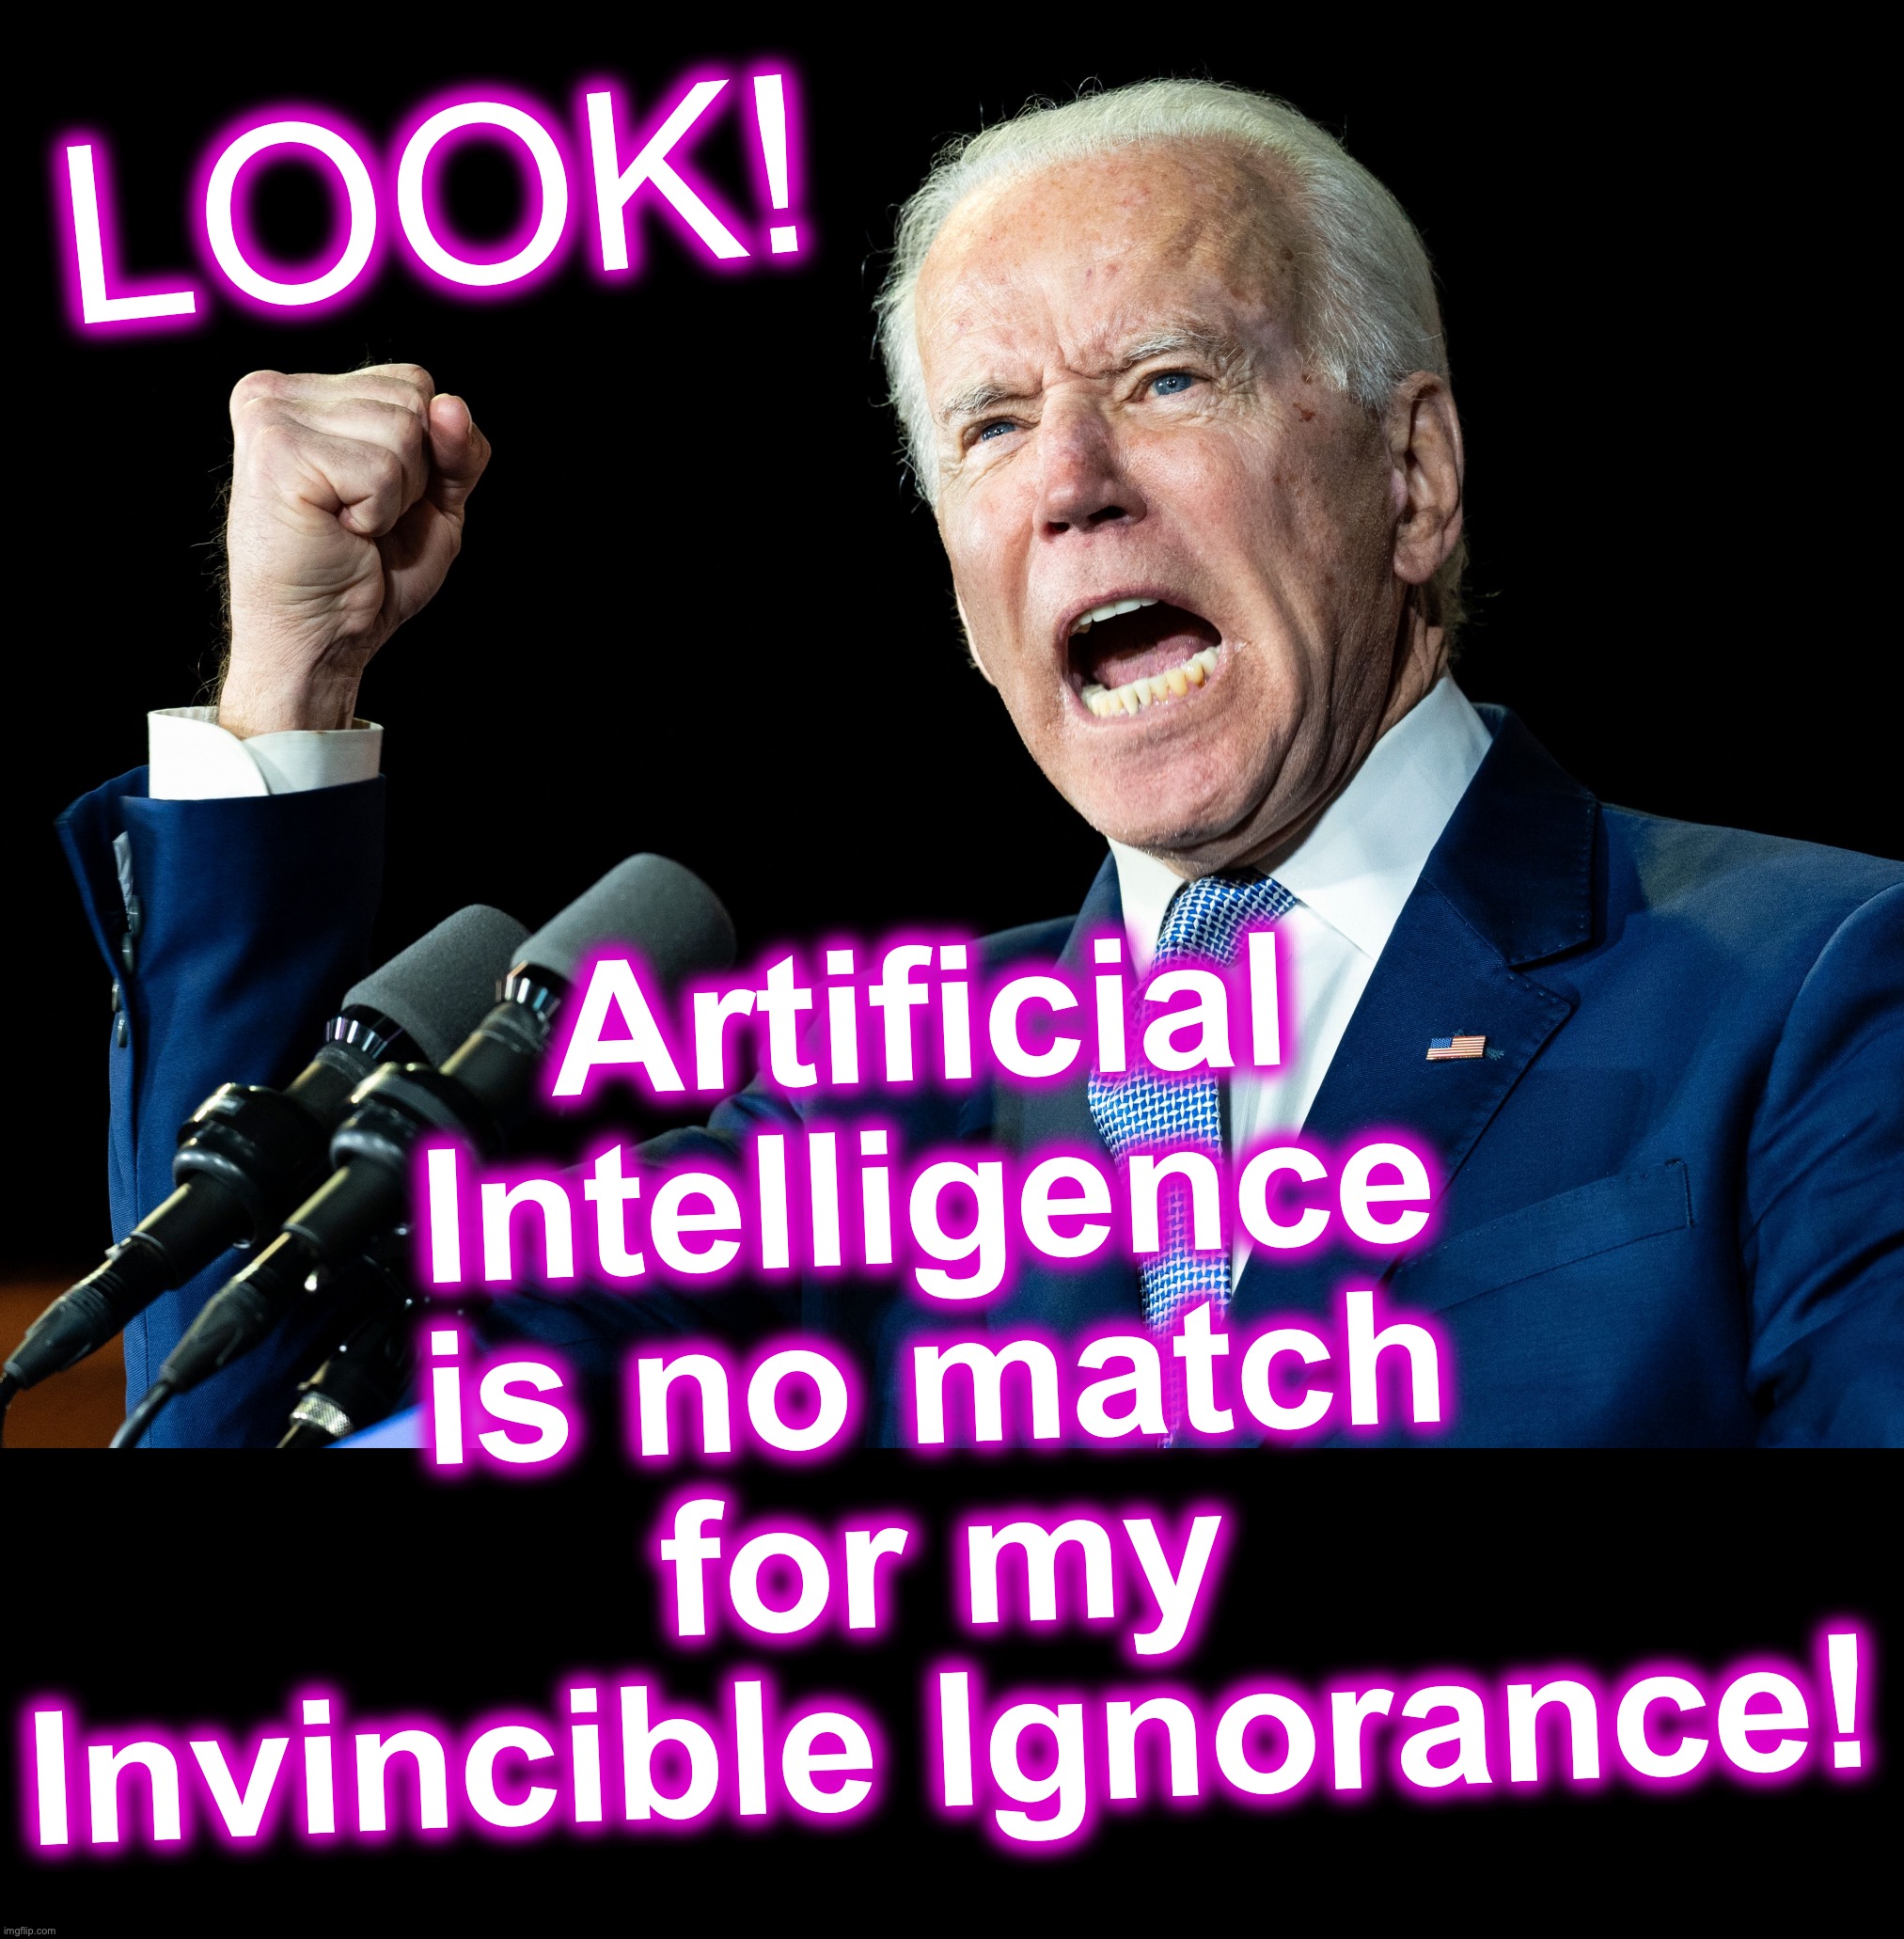 [warning: don't-happy-be-worried satire] | Artificial Intelligence is no match for my Invincible Ignorance! LOOK! | image tagged in joe biden's fist,funny memes,artificial intelligence,ignorance | made w/ Imgflip meme maker